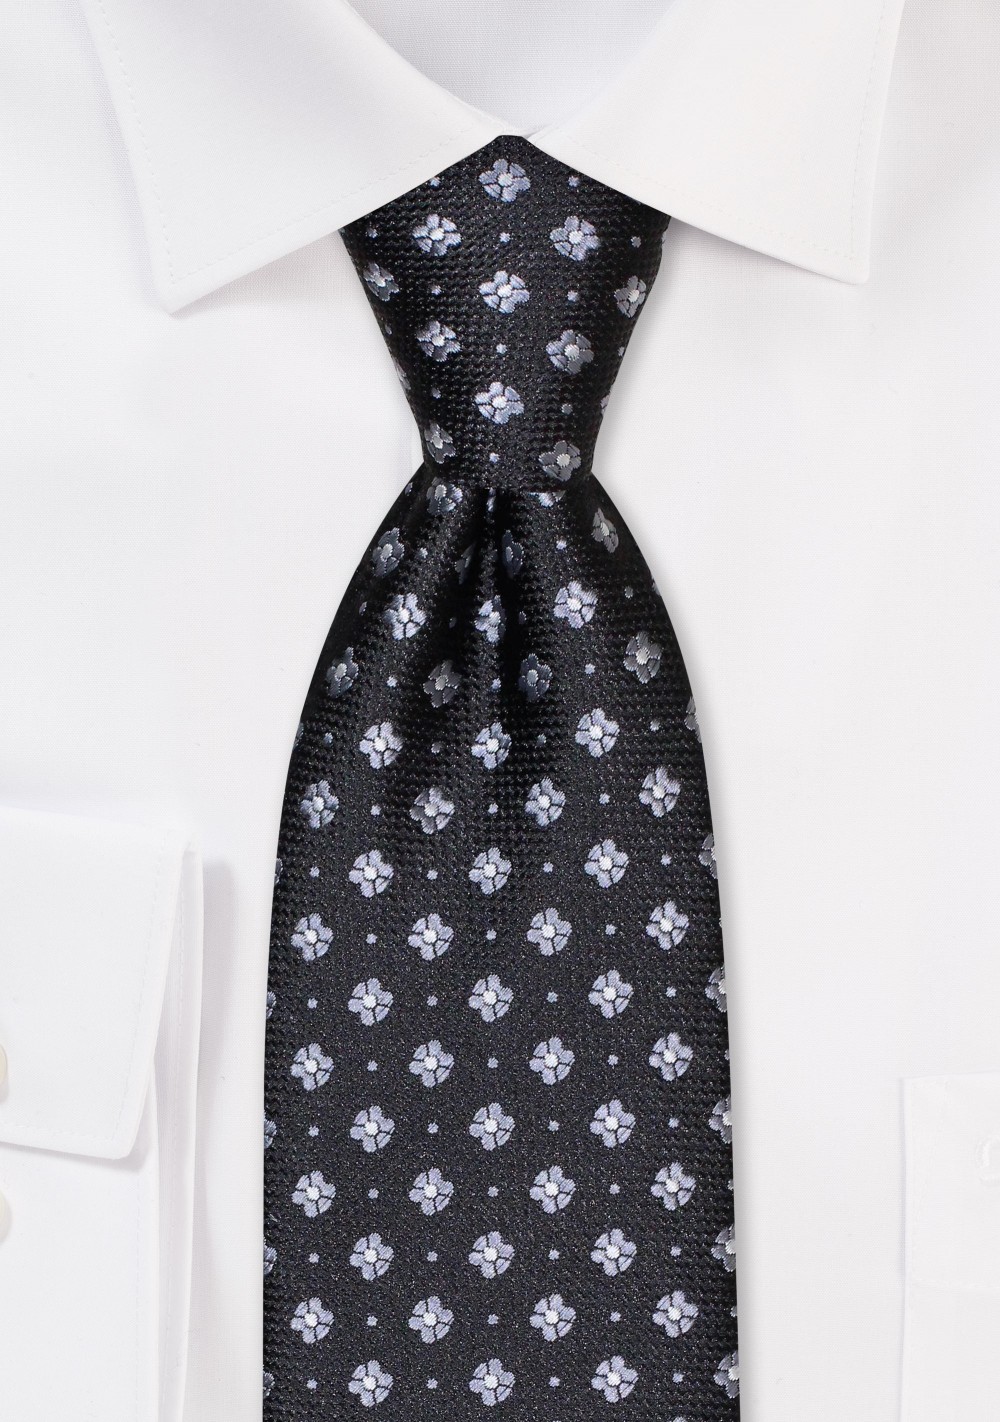 Black XL Tie with Tiny Woven Florals